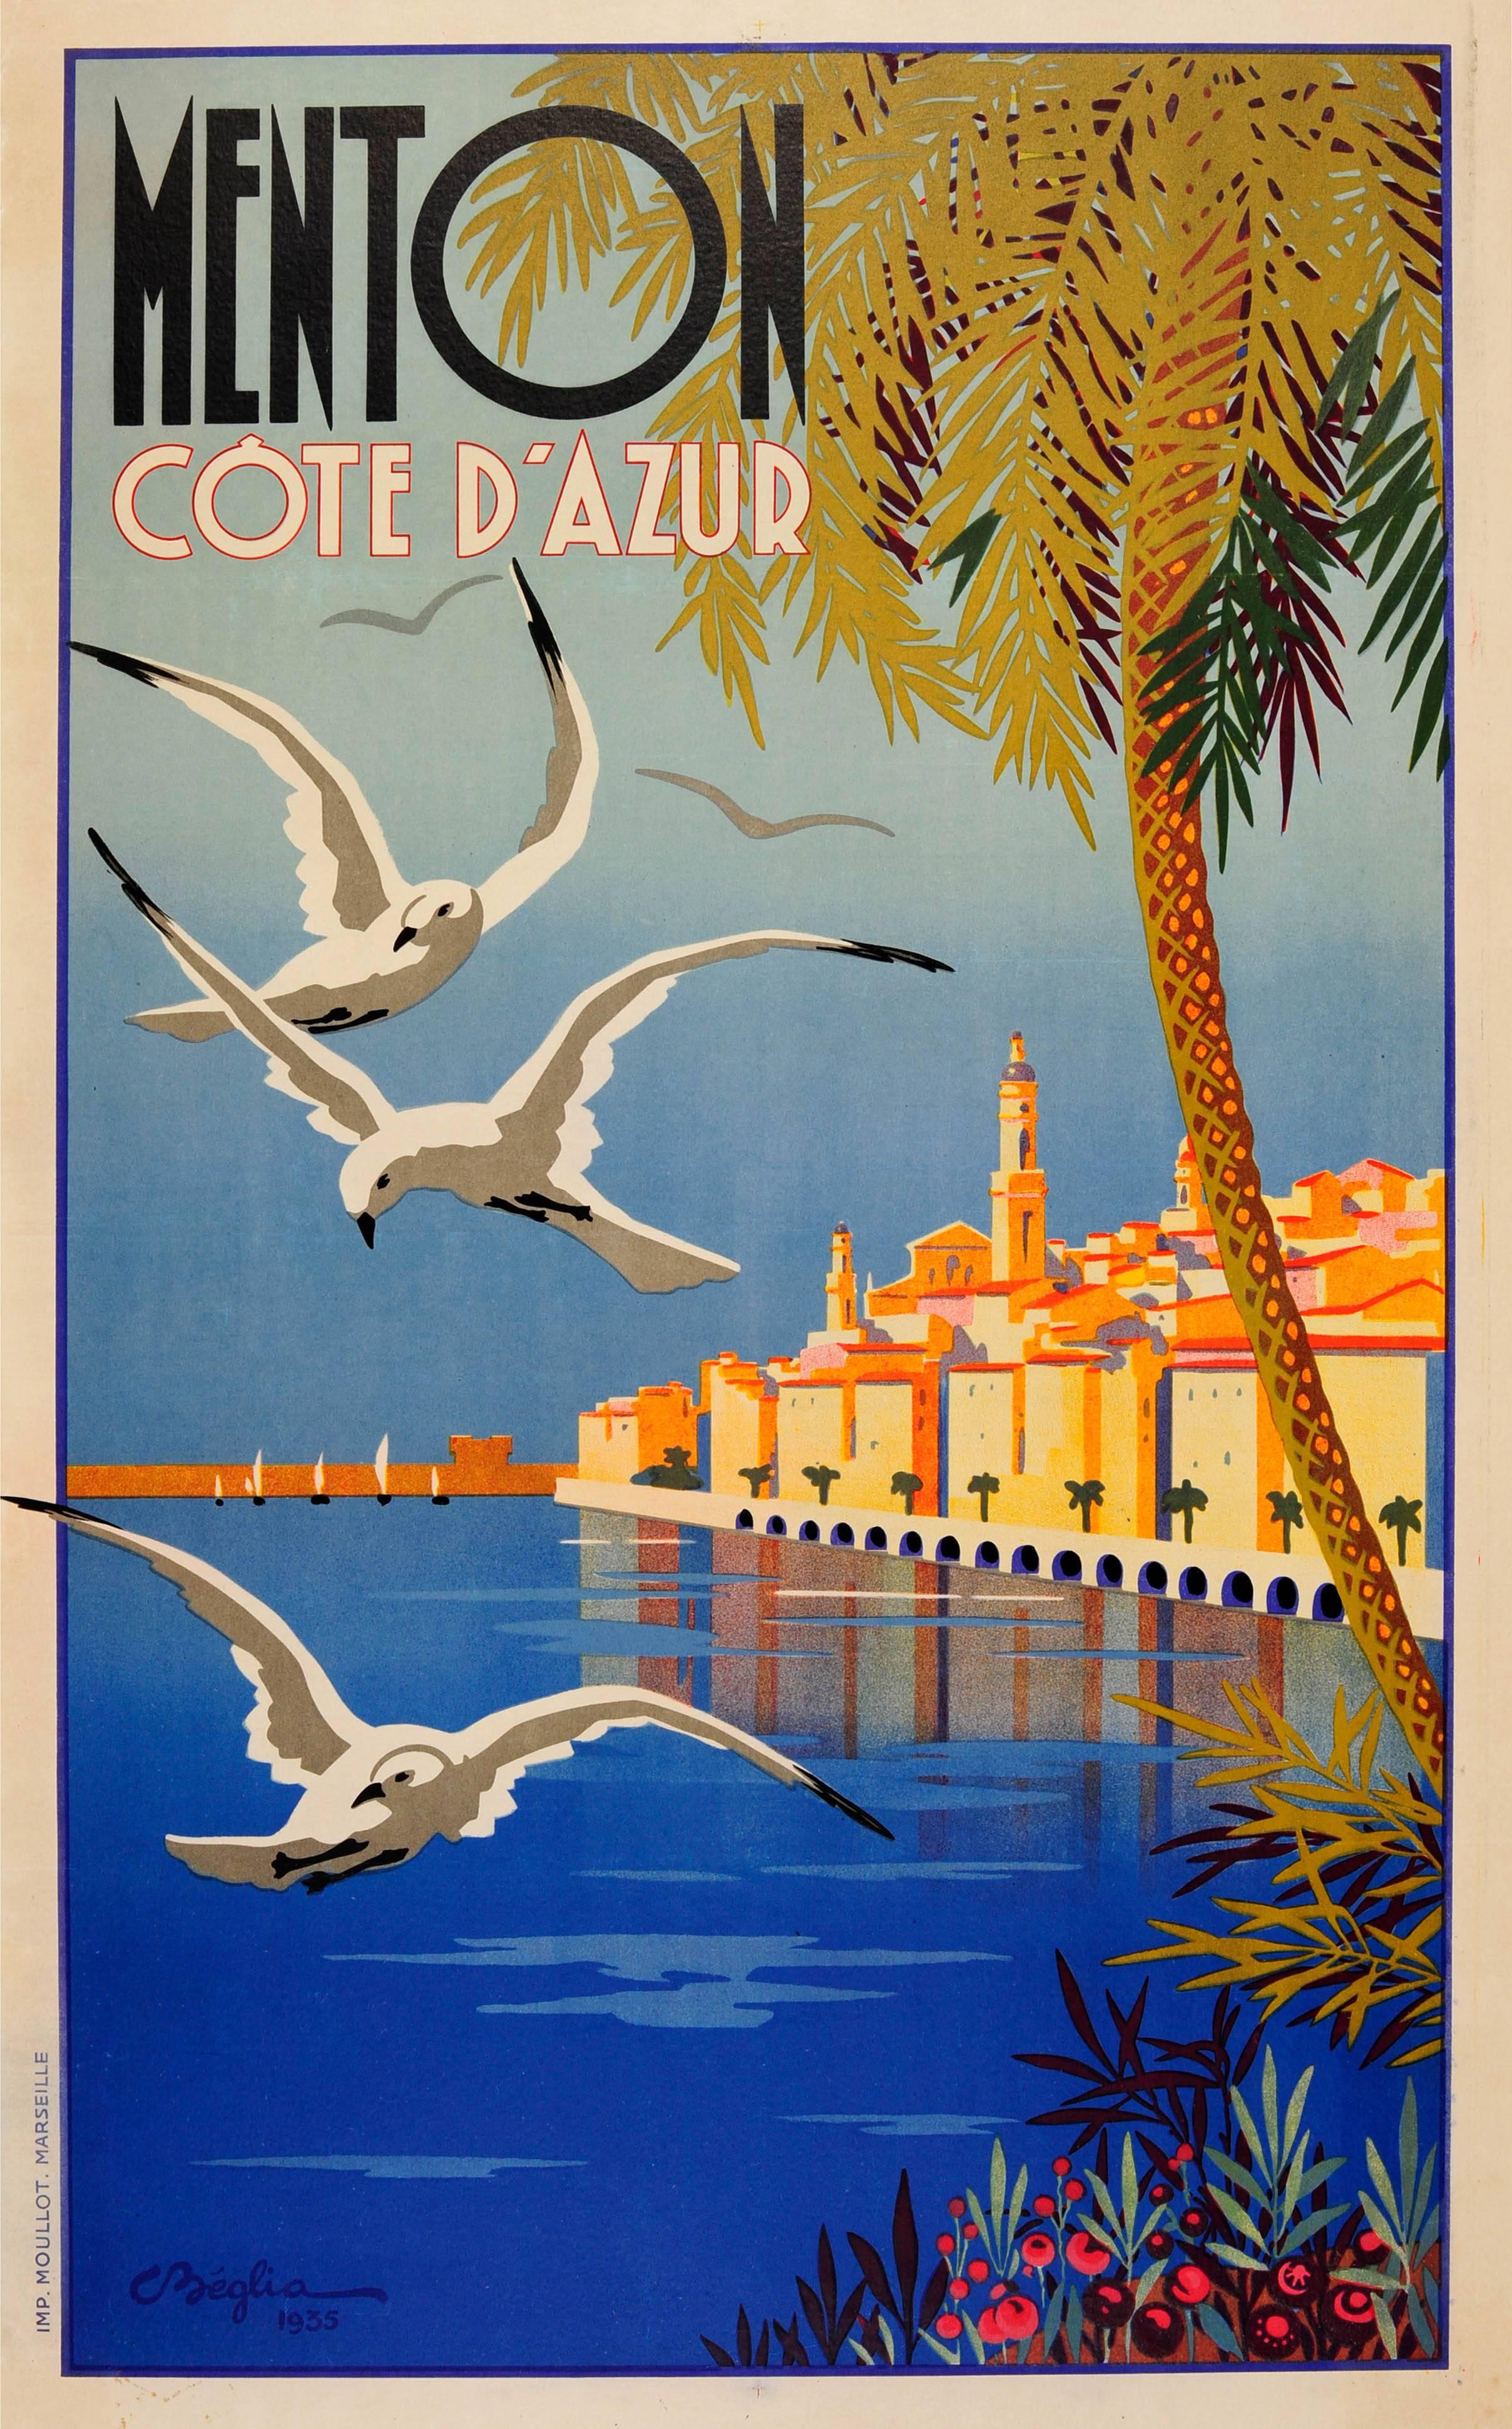 Original vintage travel poster for Menton Cote d'Azur featuring a great image of seagulls flying above clear blue sea with sailing boats in front of a harbour wall in the distance, the town running along a promenade and a palm tree with flowers in